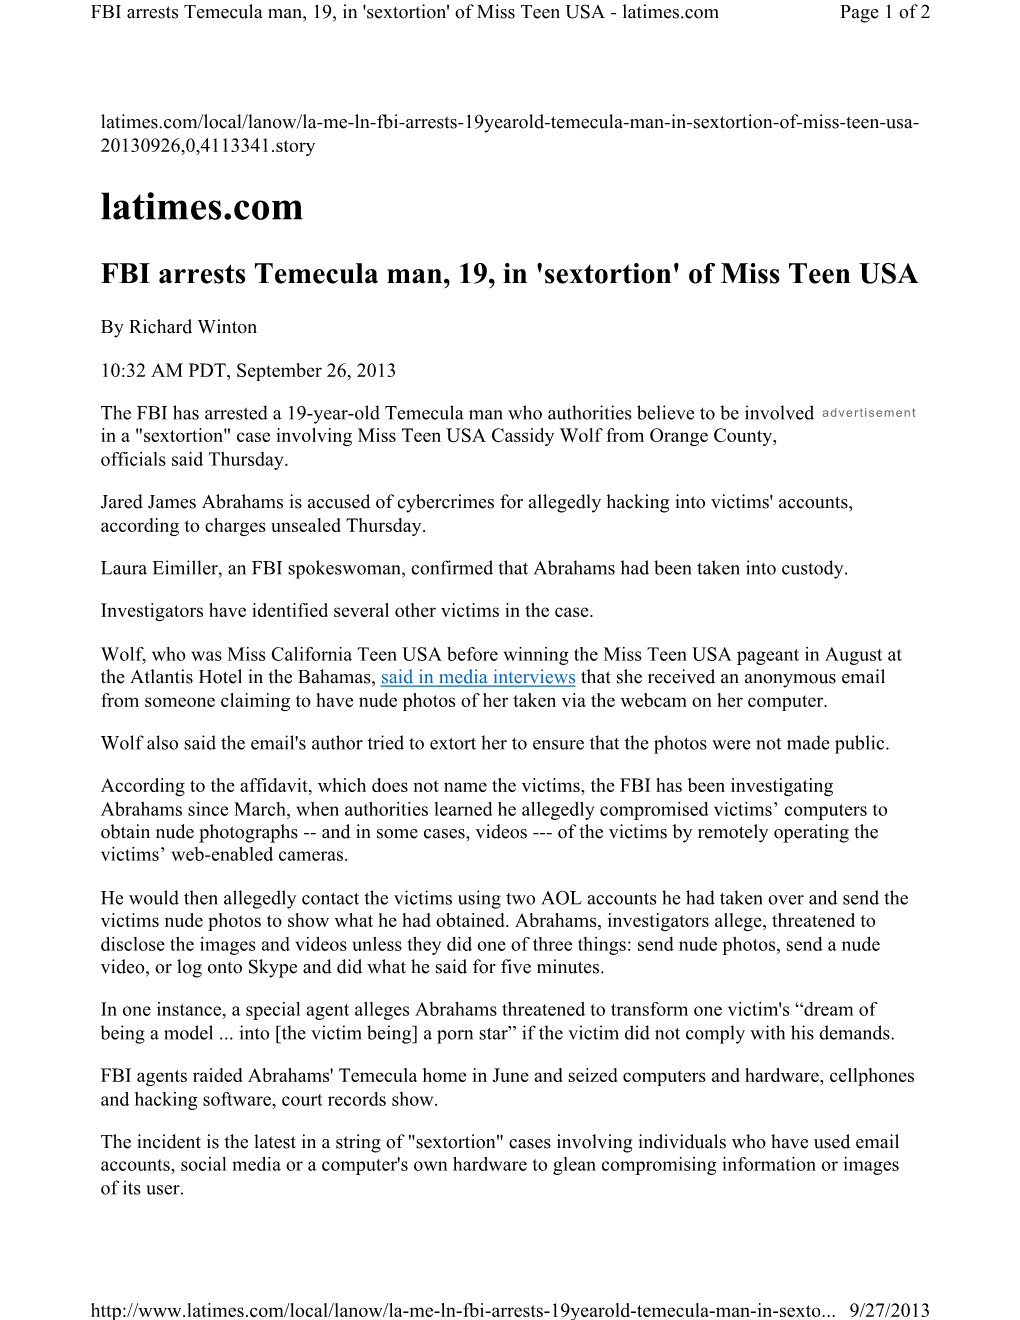 'Sextortion' of Miss Teen USA - Latimes.Com Page 1 of 2